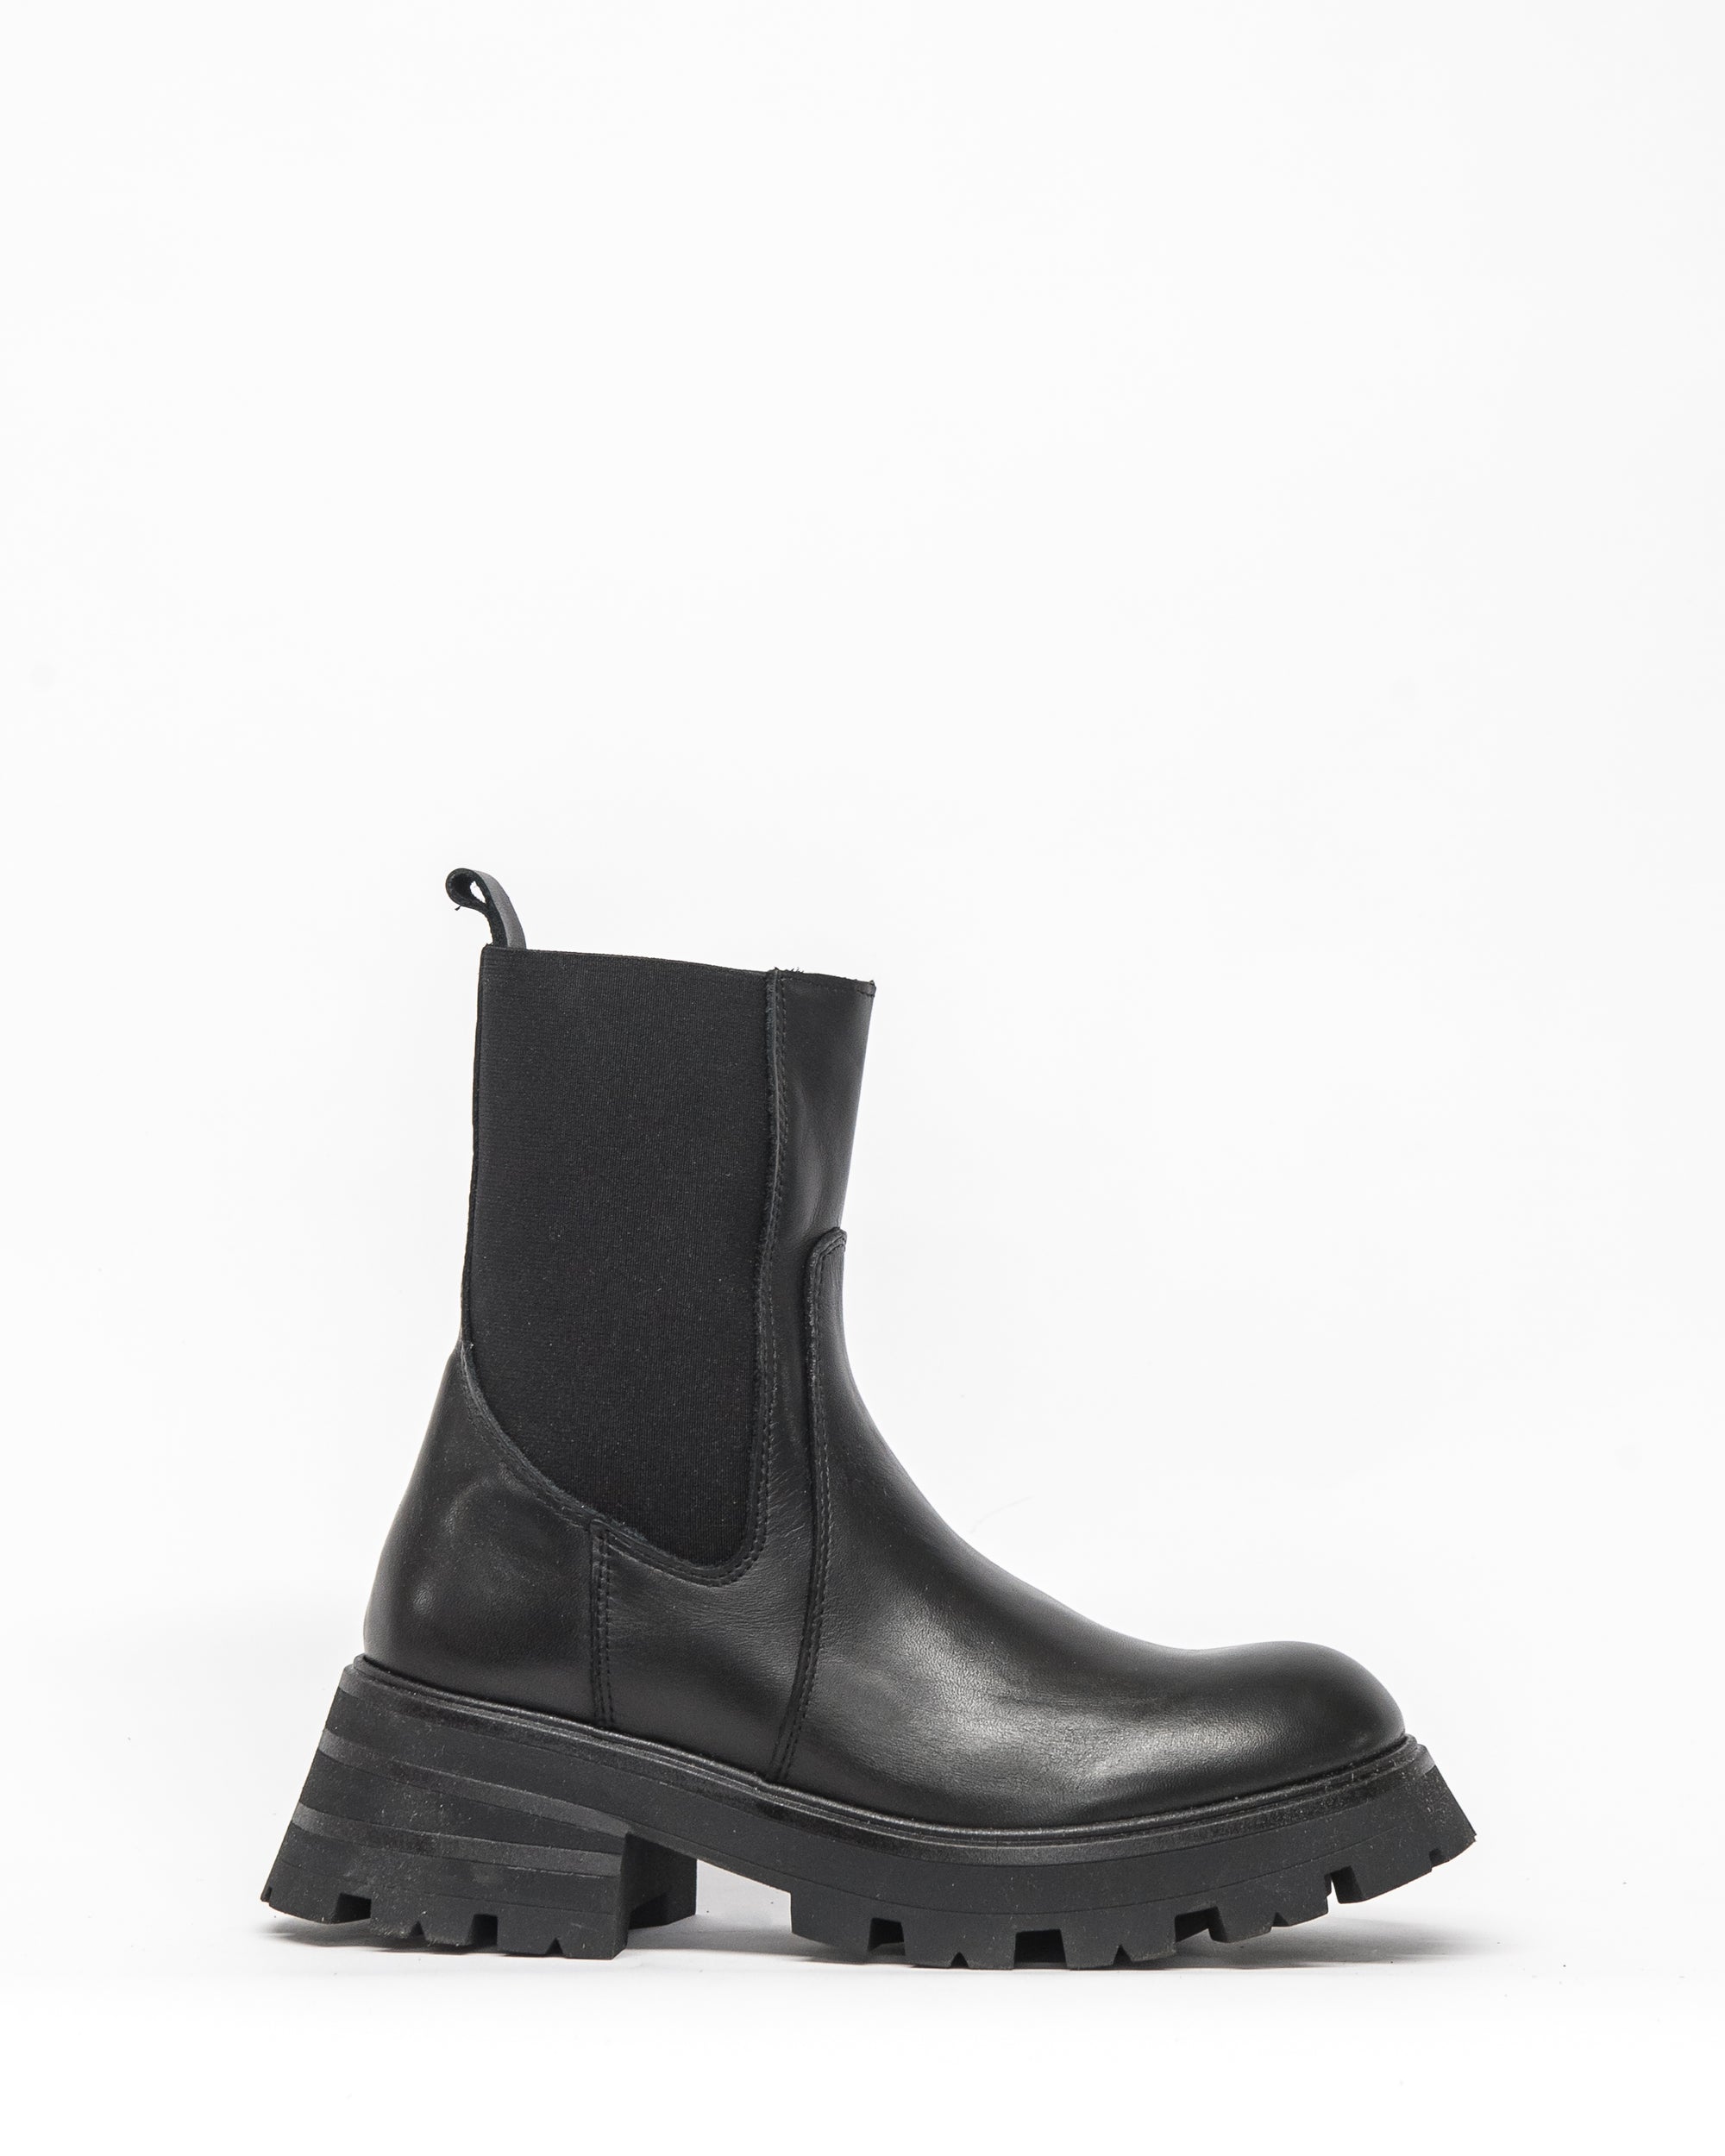 inset boot - black leather